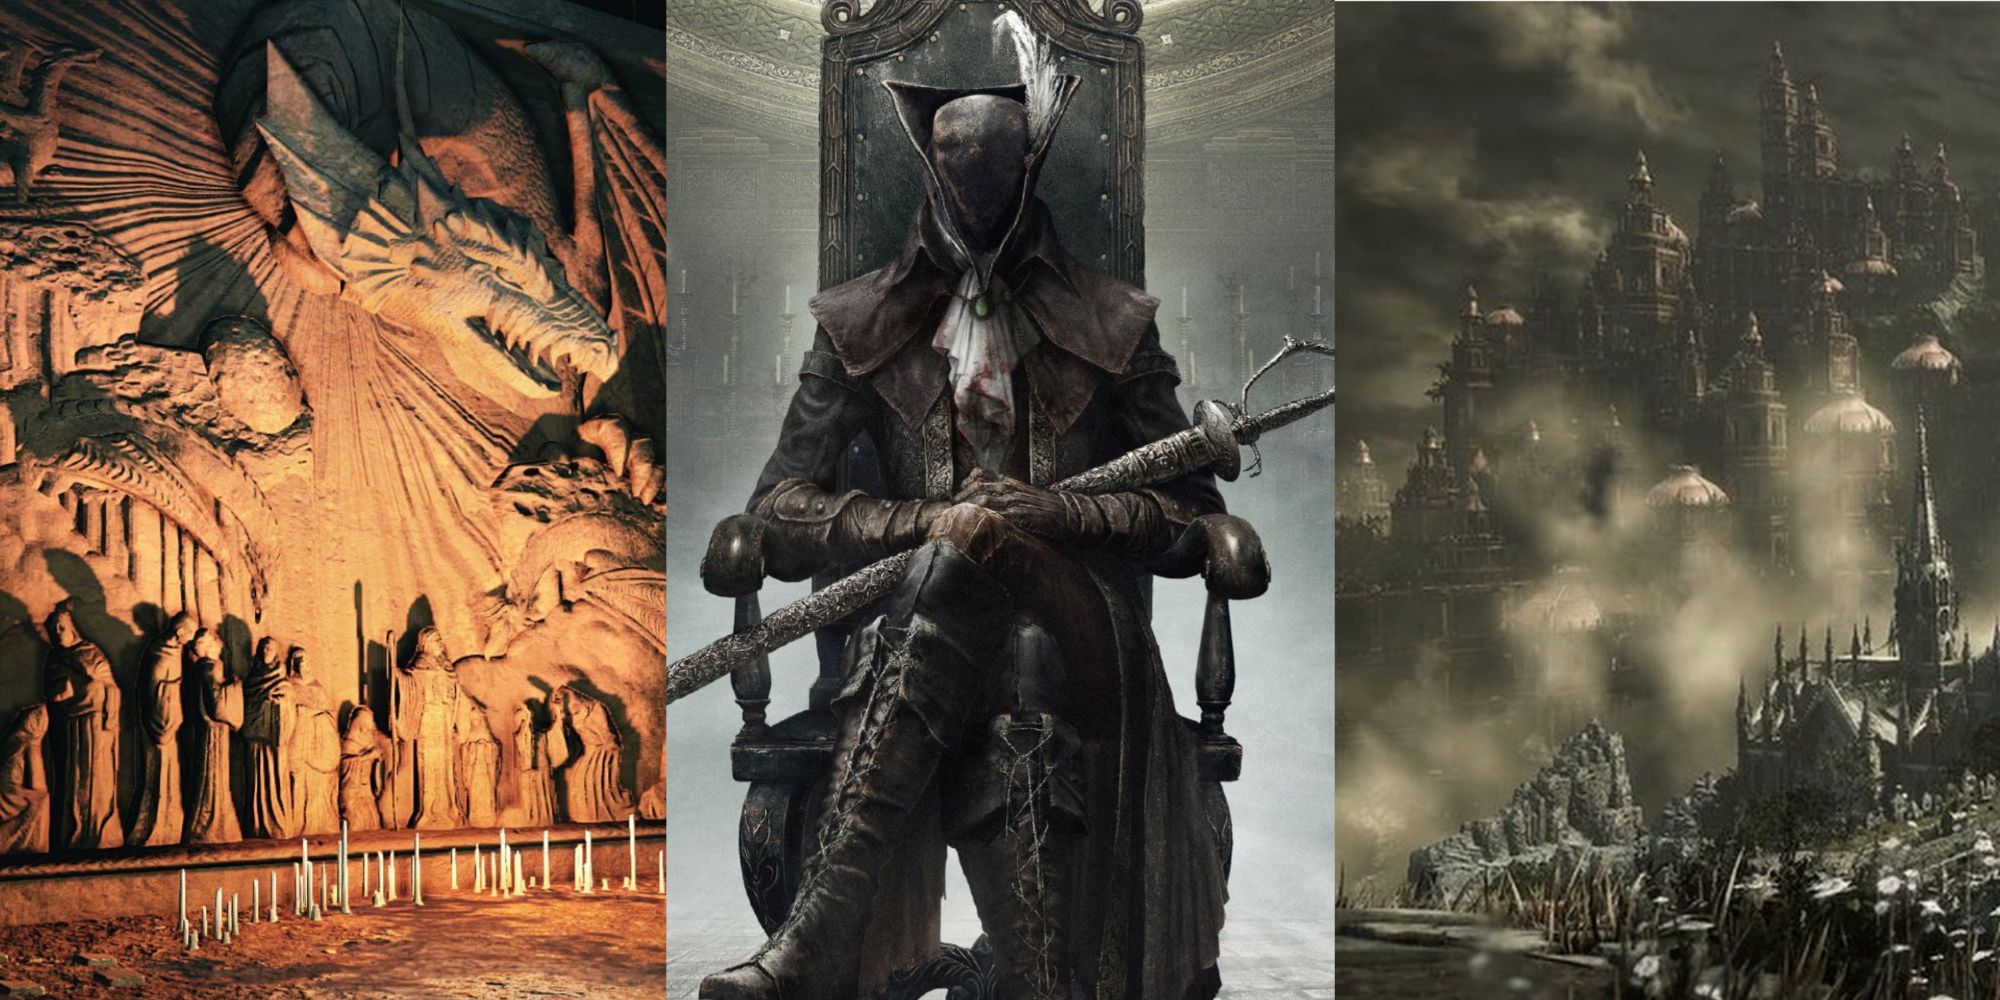 Wall carving depicting Sinh in Dark Souls 2, Lady Maria stain her chair in Bloodborne, and the Ringed City from Dark Souls 3, left to right